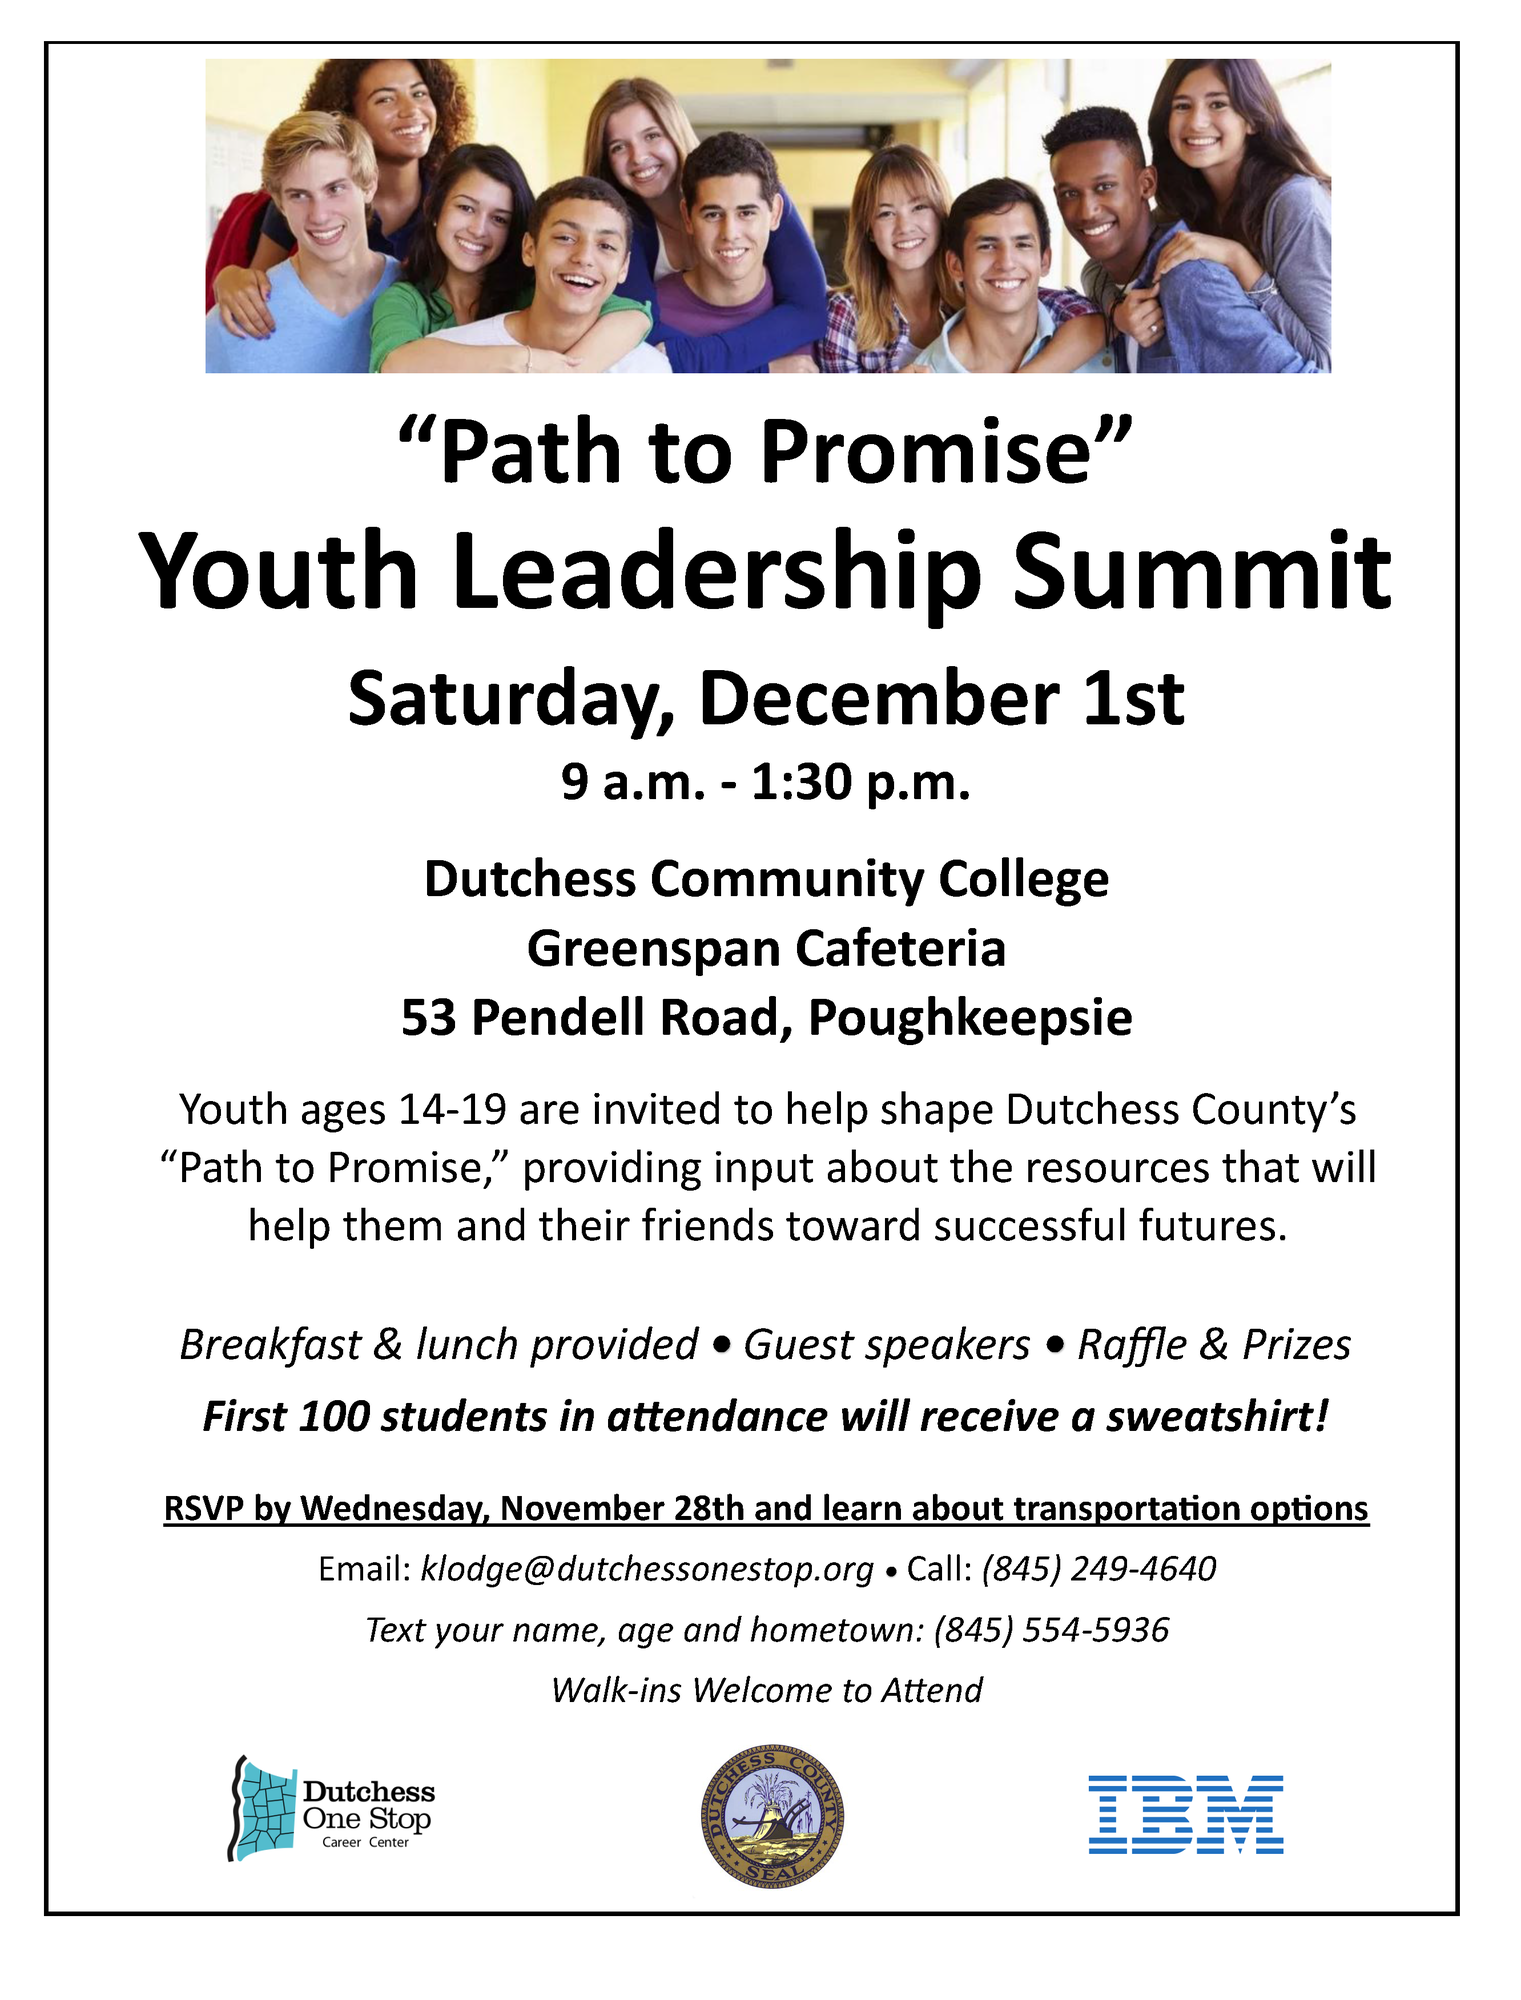 County to Host ‘Path to Promise’ Youth Leadership Summit on December 1st